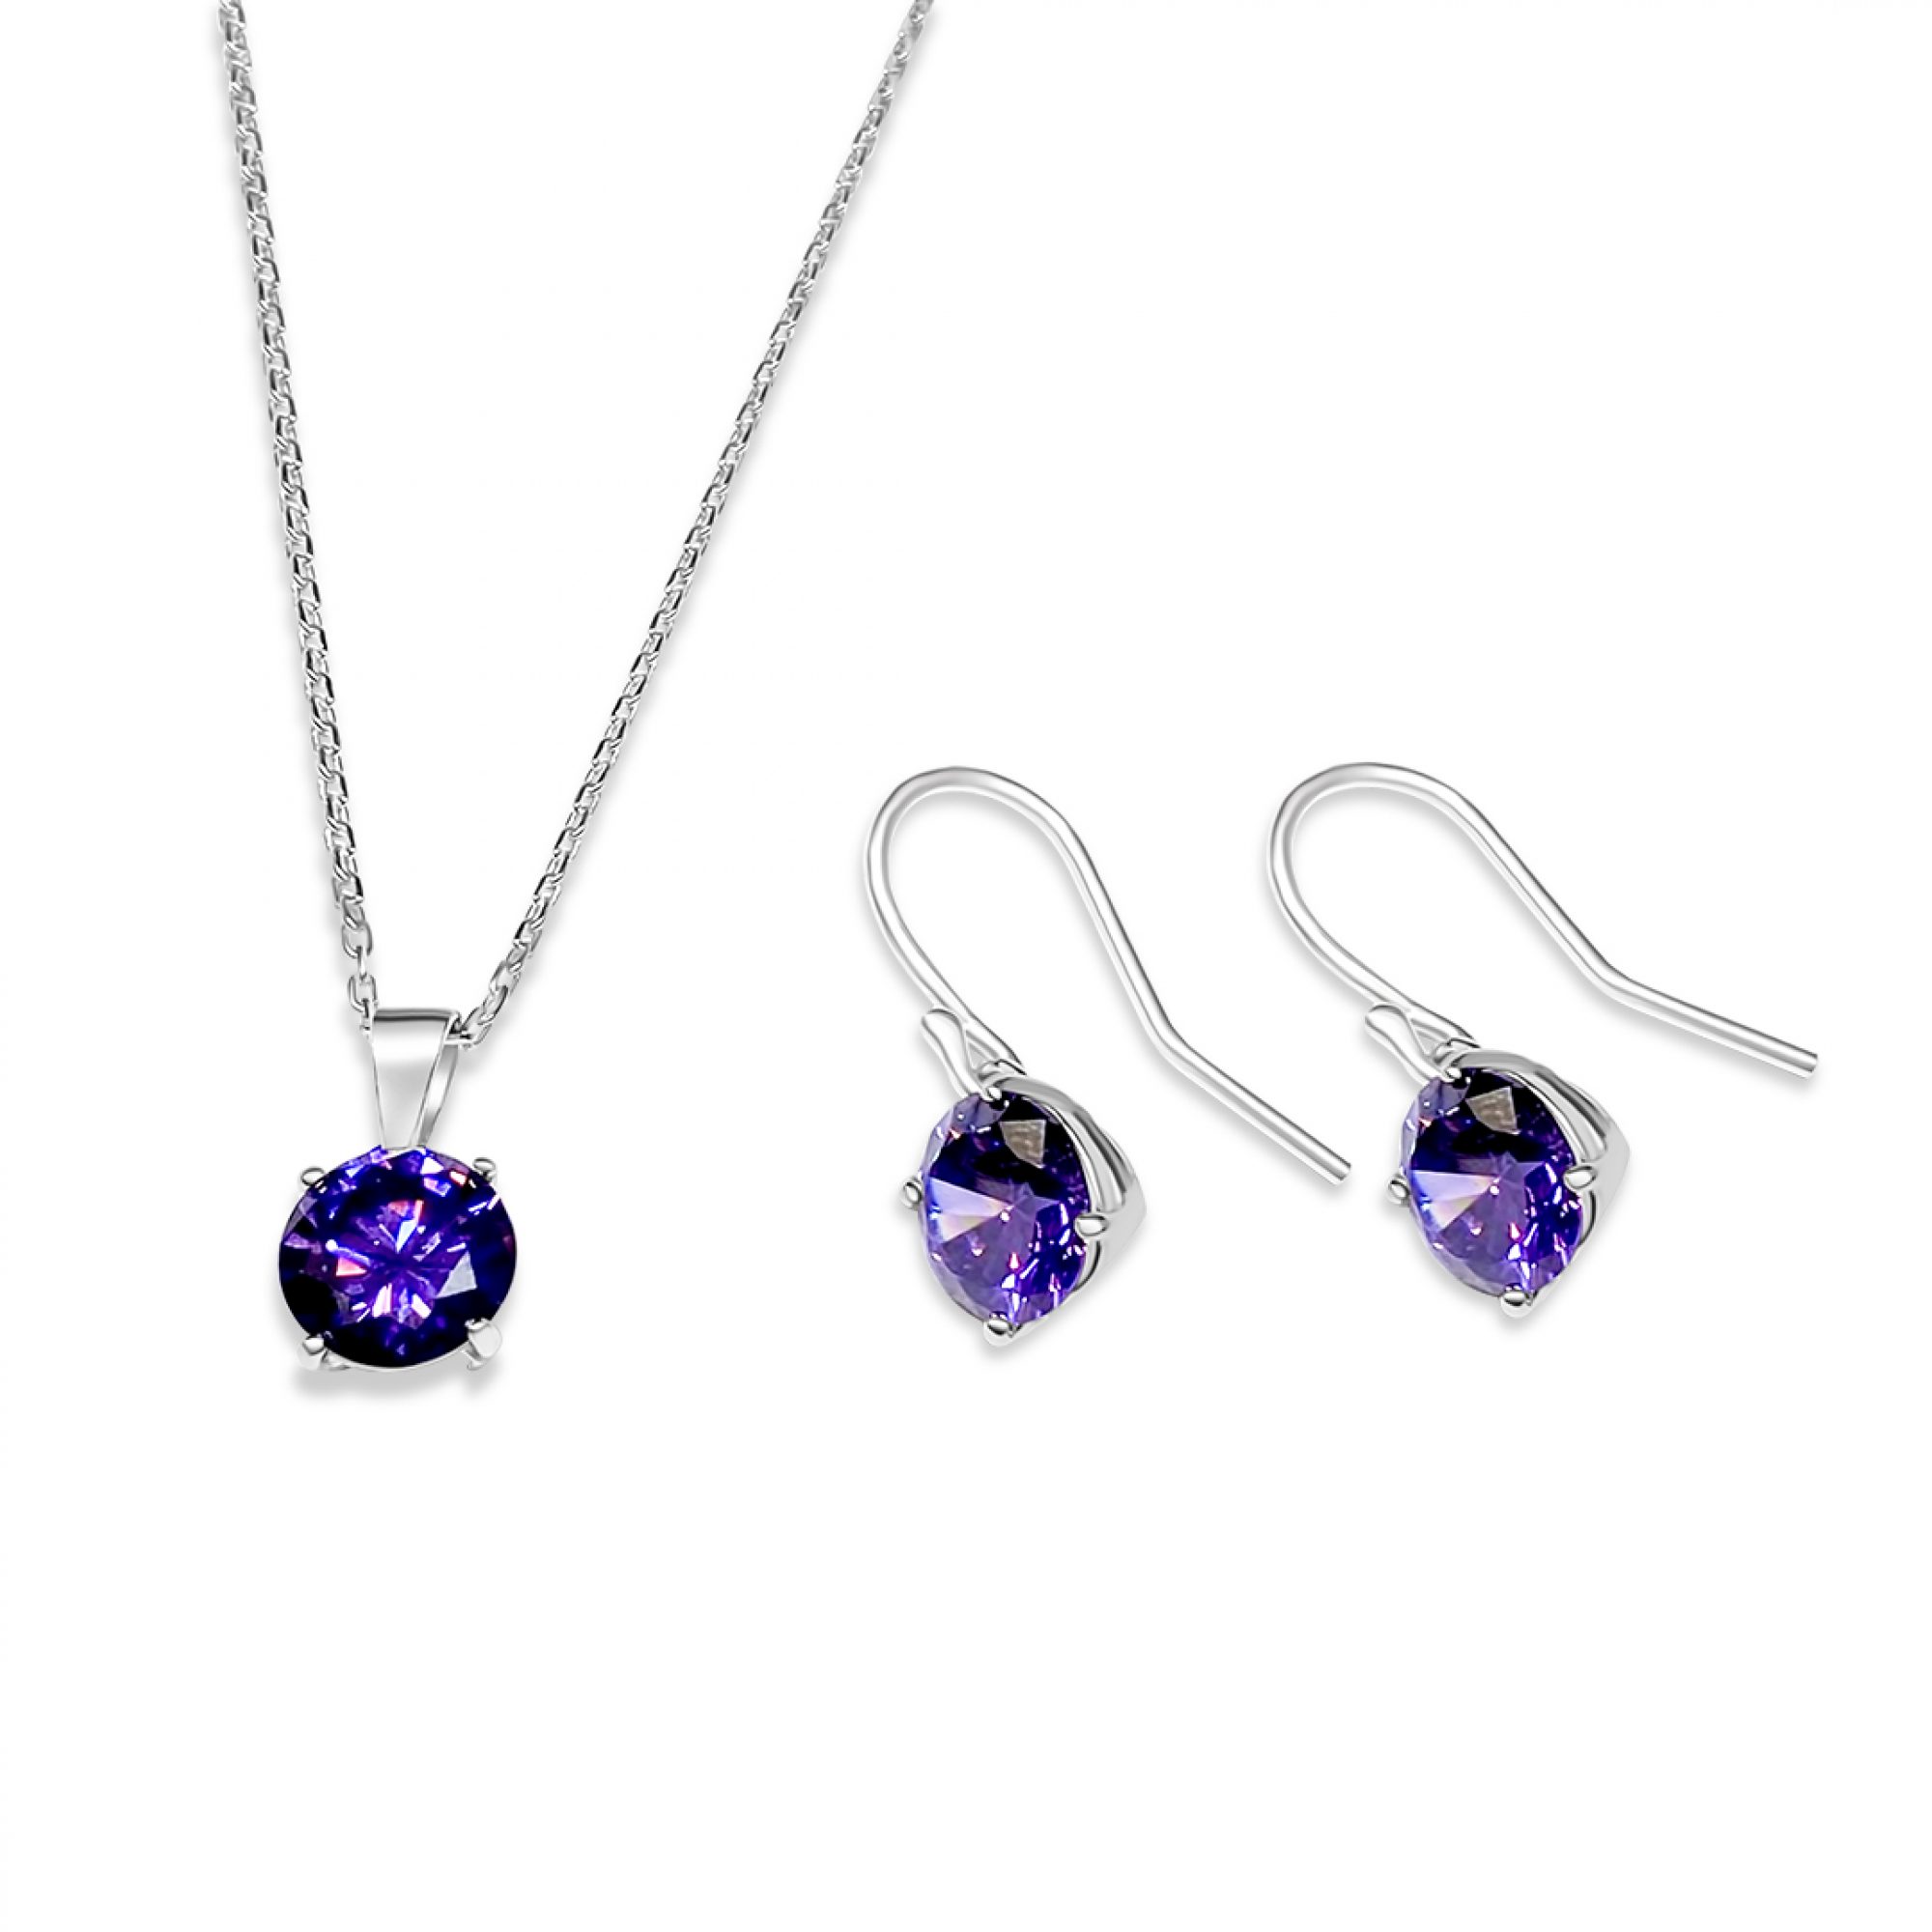 Set with amethyst stones